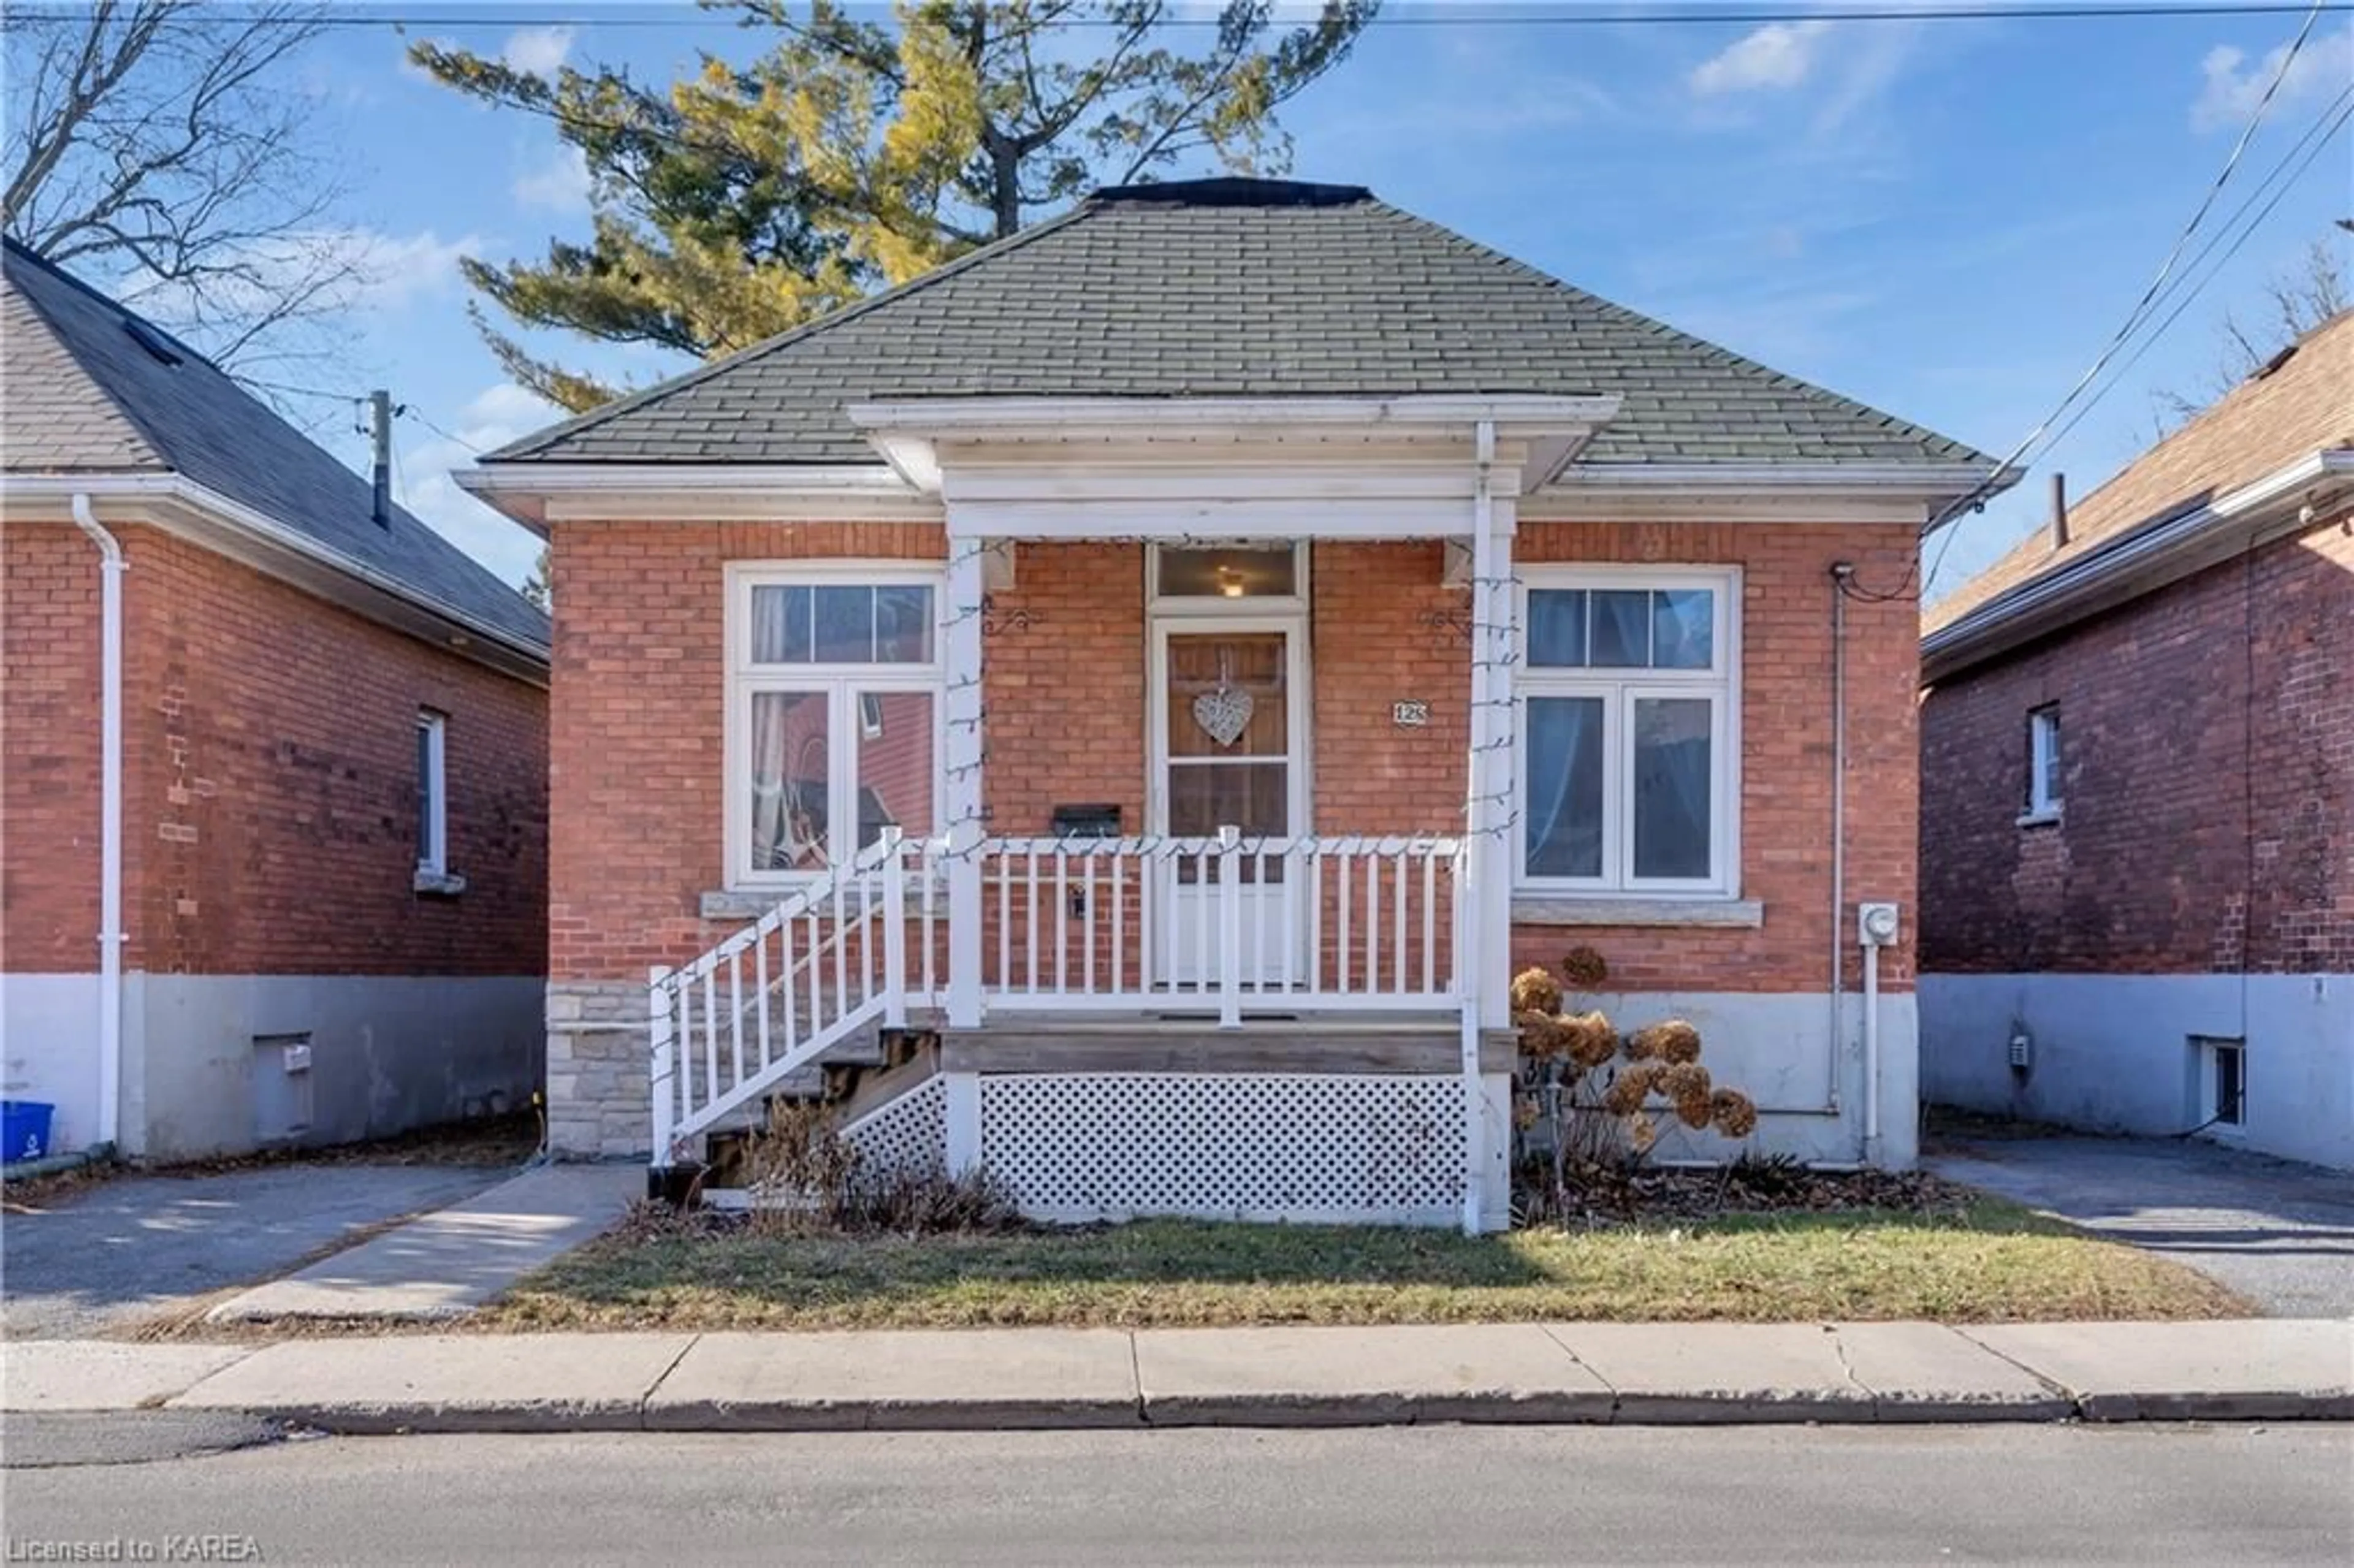 Home with brick exterior material for 128 Chatham St, Kingston Ontario K7K 4H4